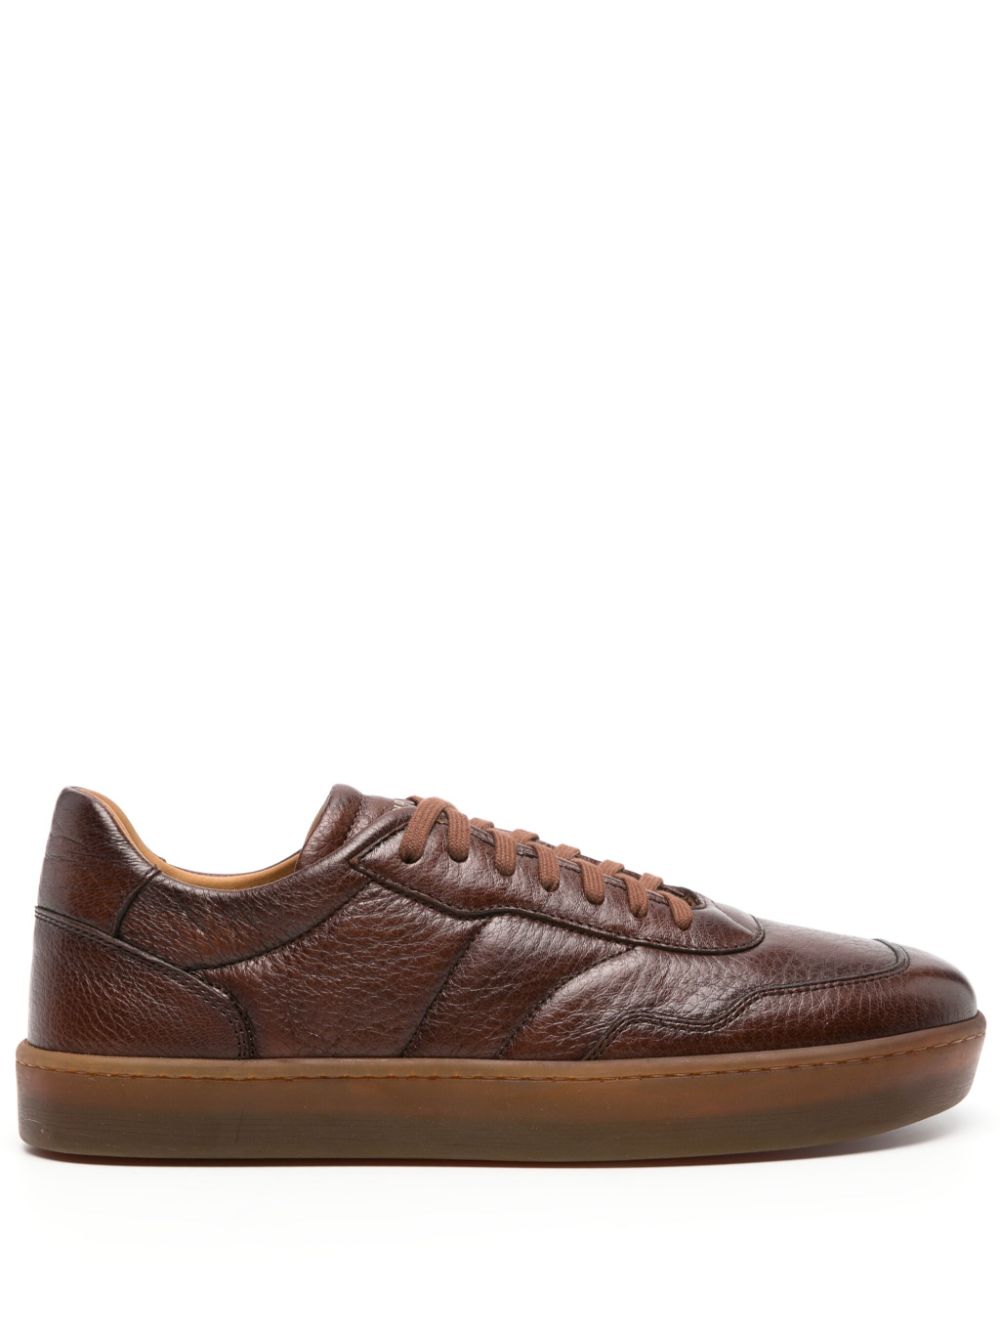 HENDERSON BARACCO LACE-UP LEATHER SNEAKERS